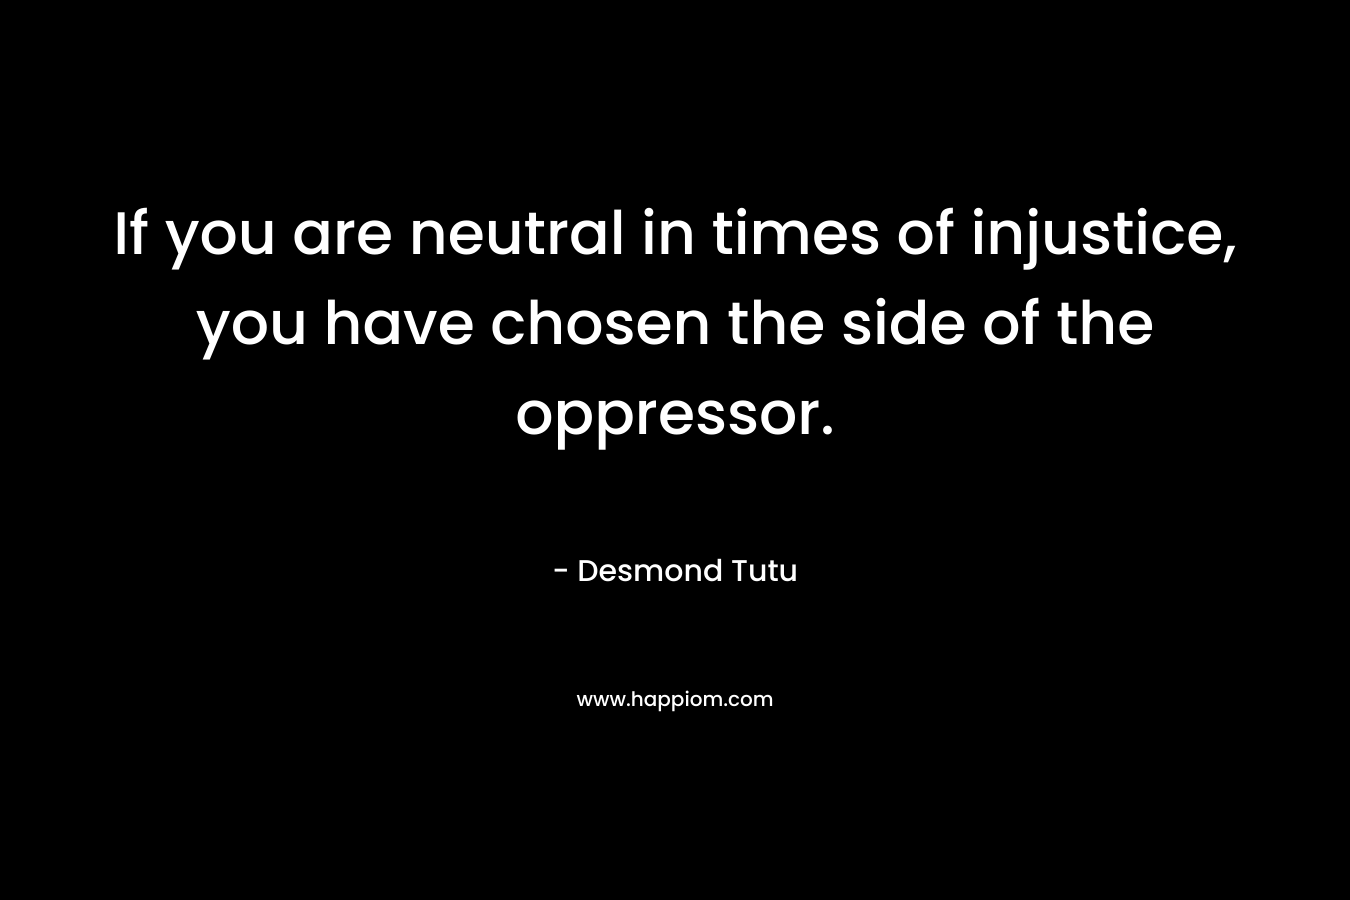 If you are neutral in times of injustice, you have chosen the side of the oppressor. – Desmond Tutu